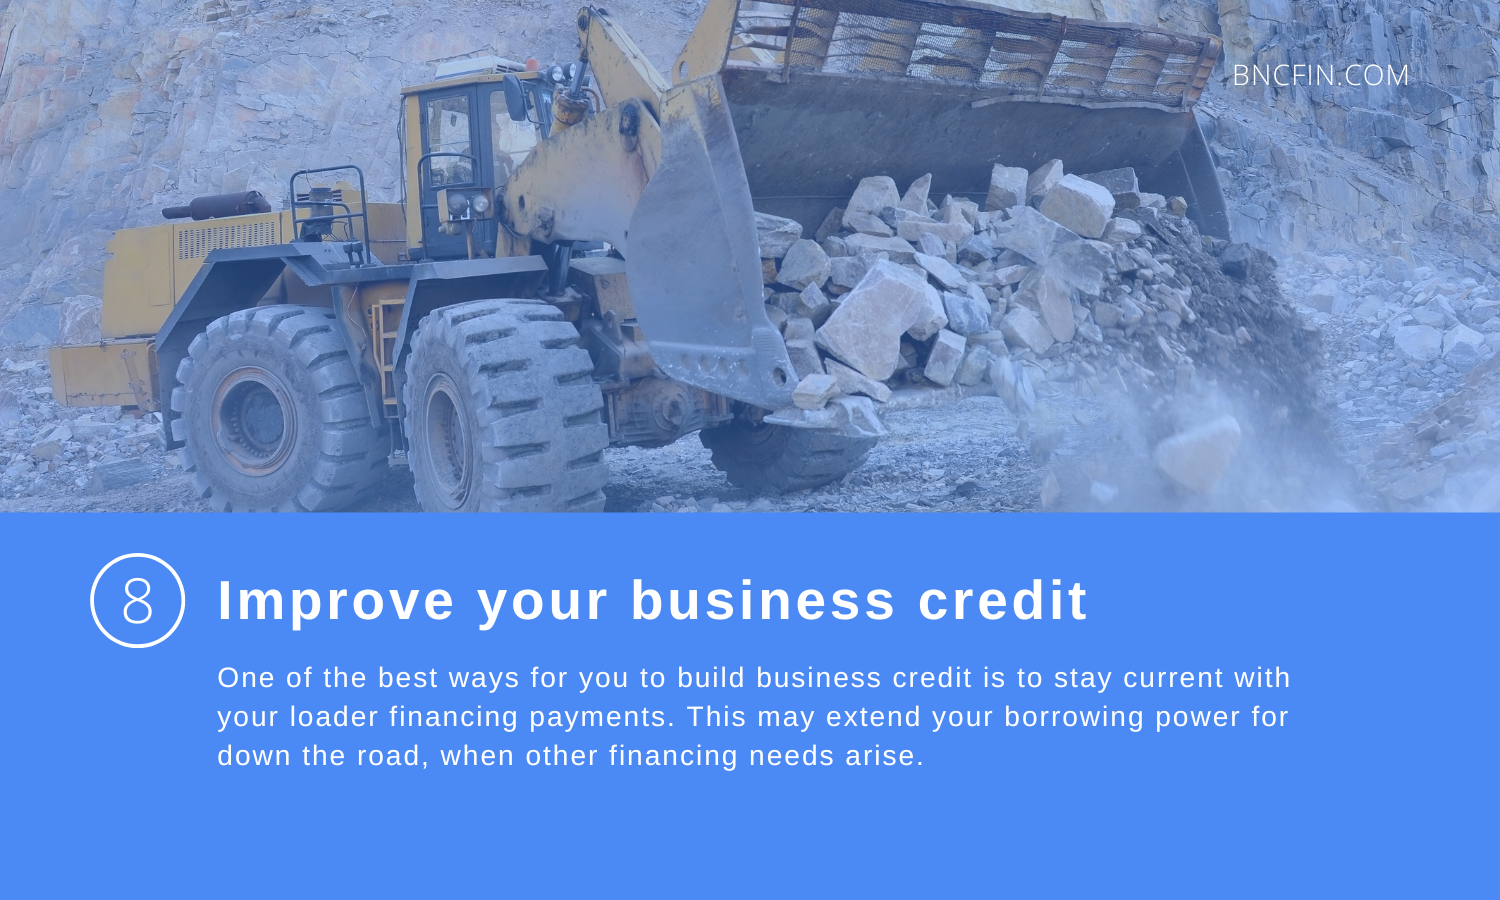 Improve your business credit.